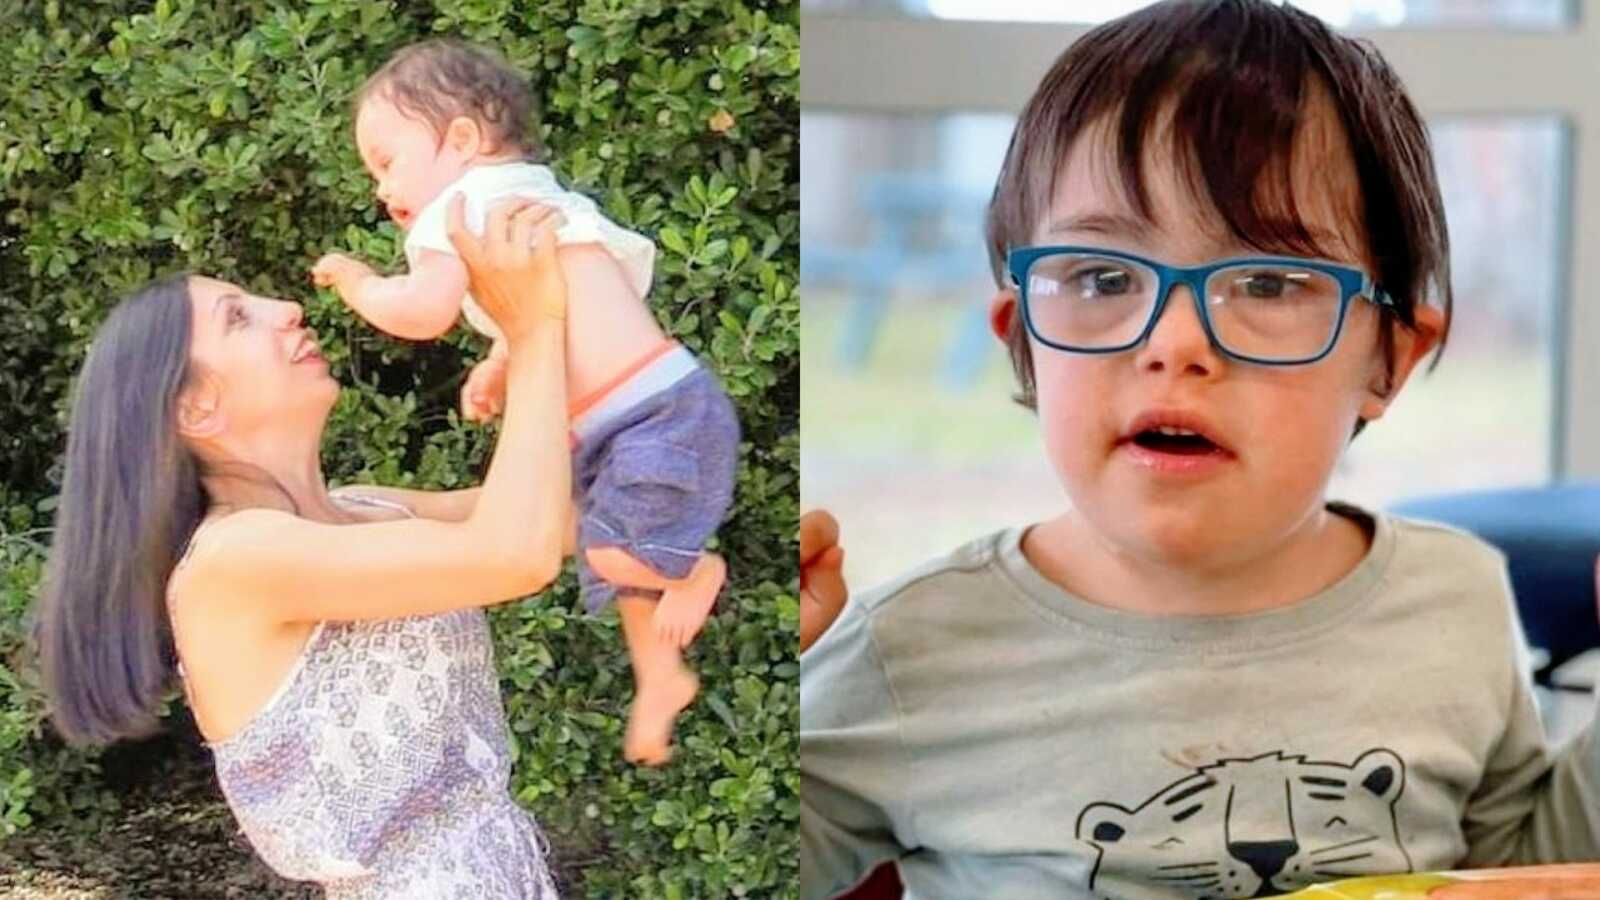 Special needs mom shares photos of her son born with Down syndrome